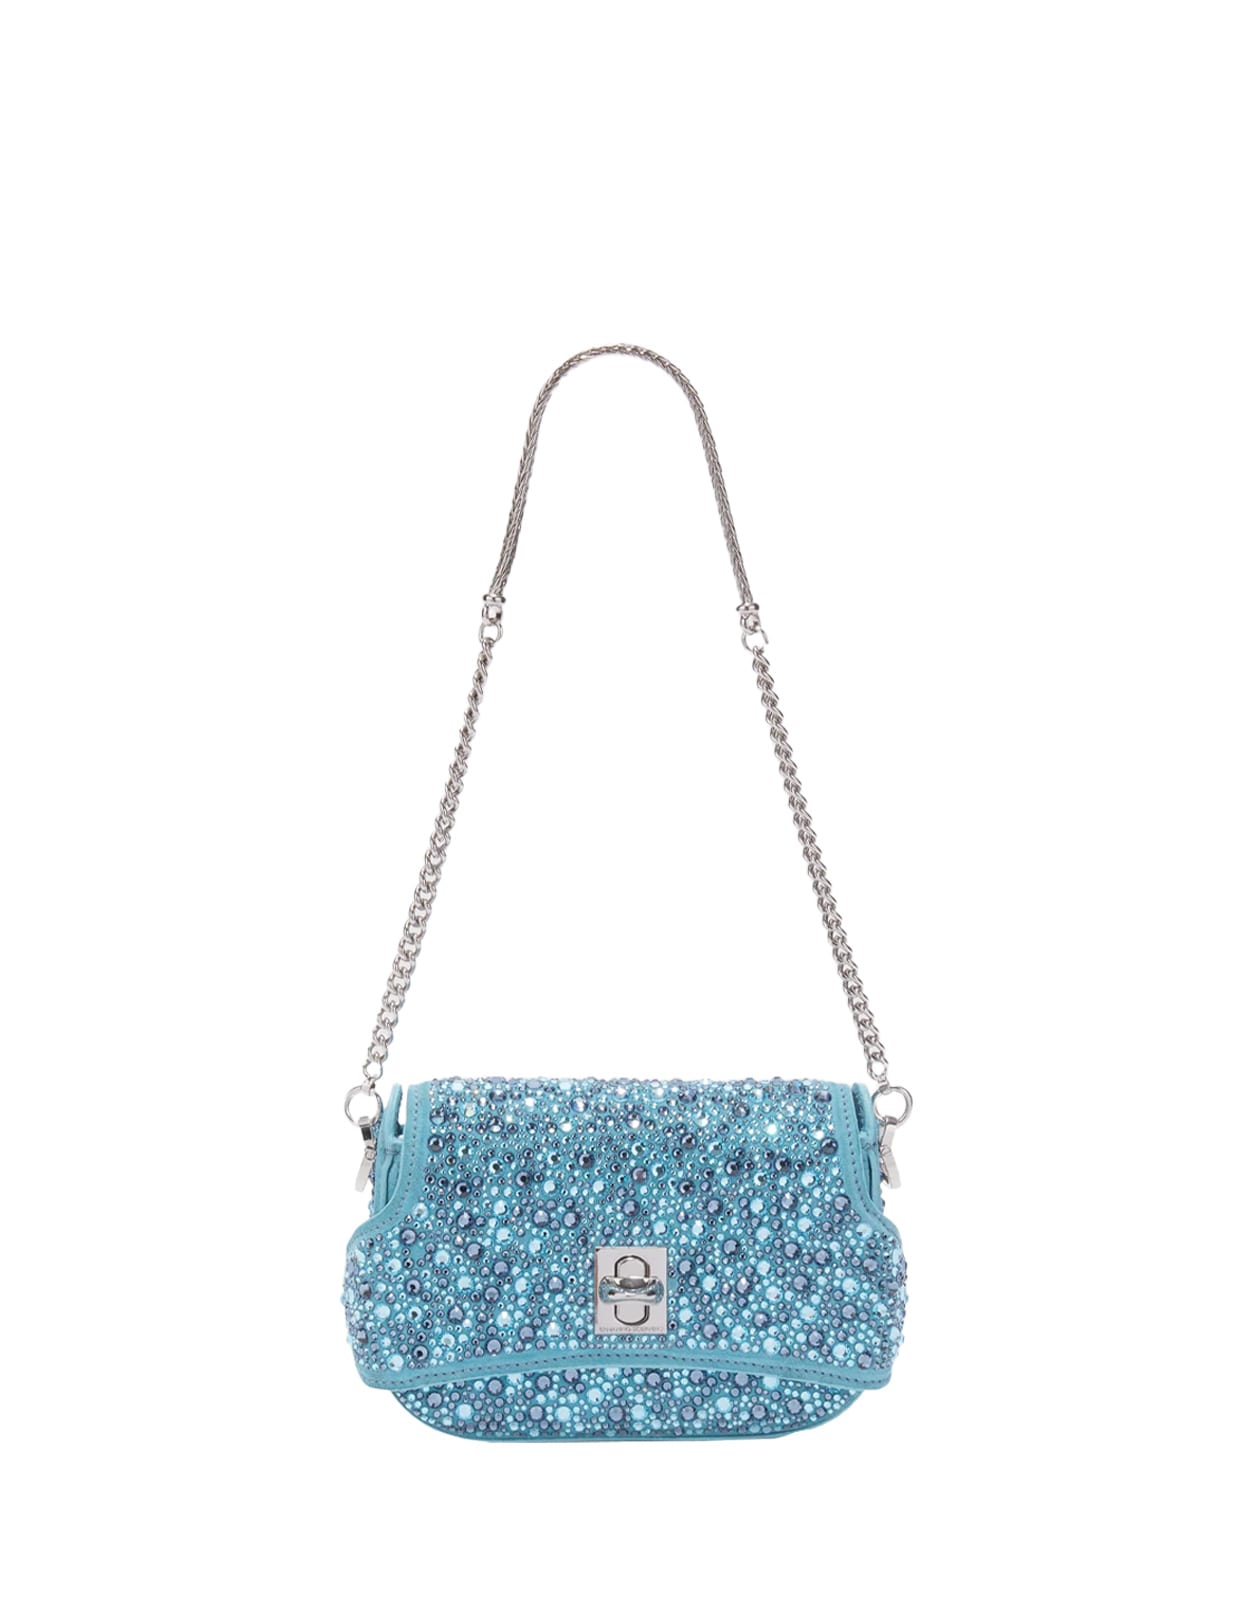 Light Blue Audrey Bag With Crystals